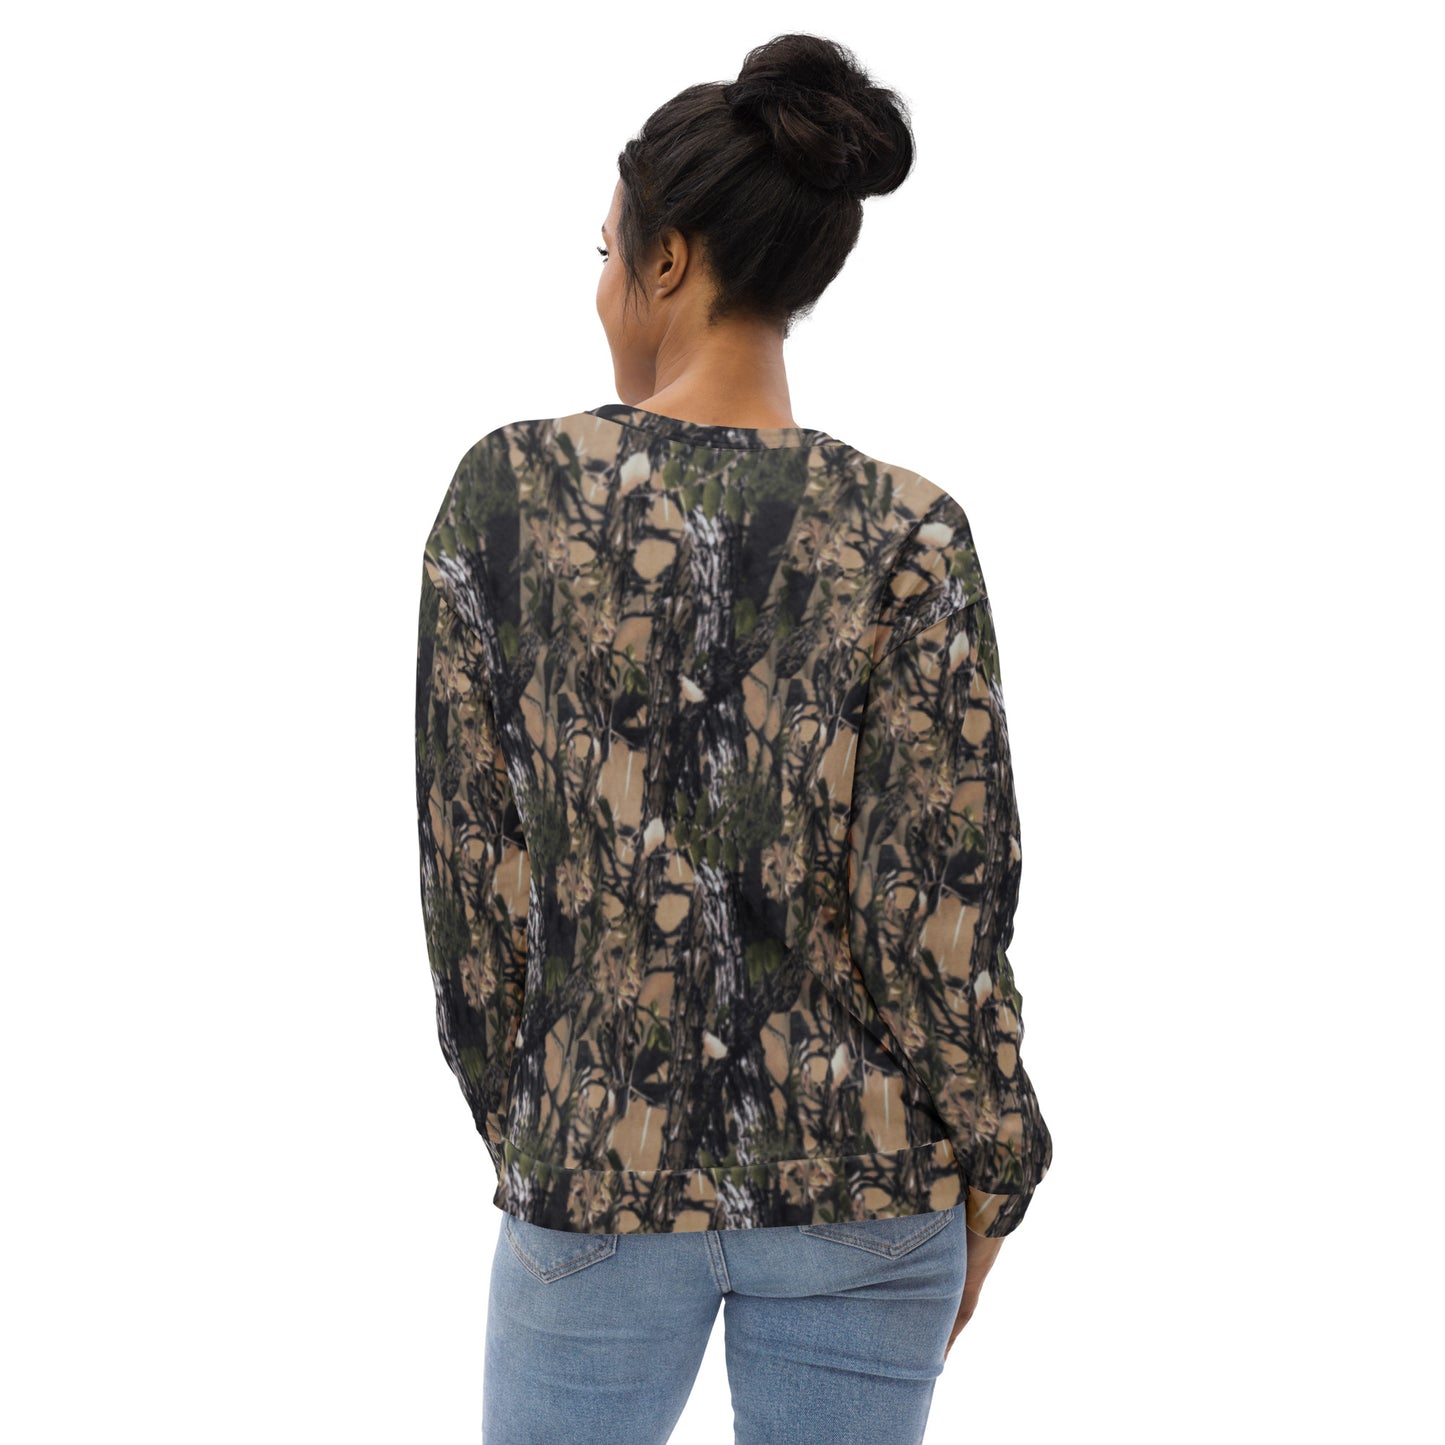 A picture of a women wearing a unisex all over print Camouflage Long sleeve sweatshirt - back side